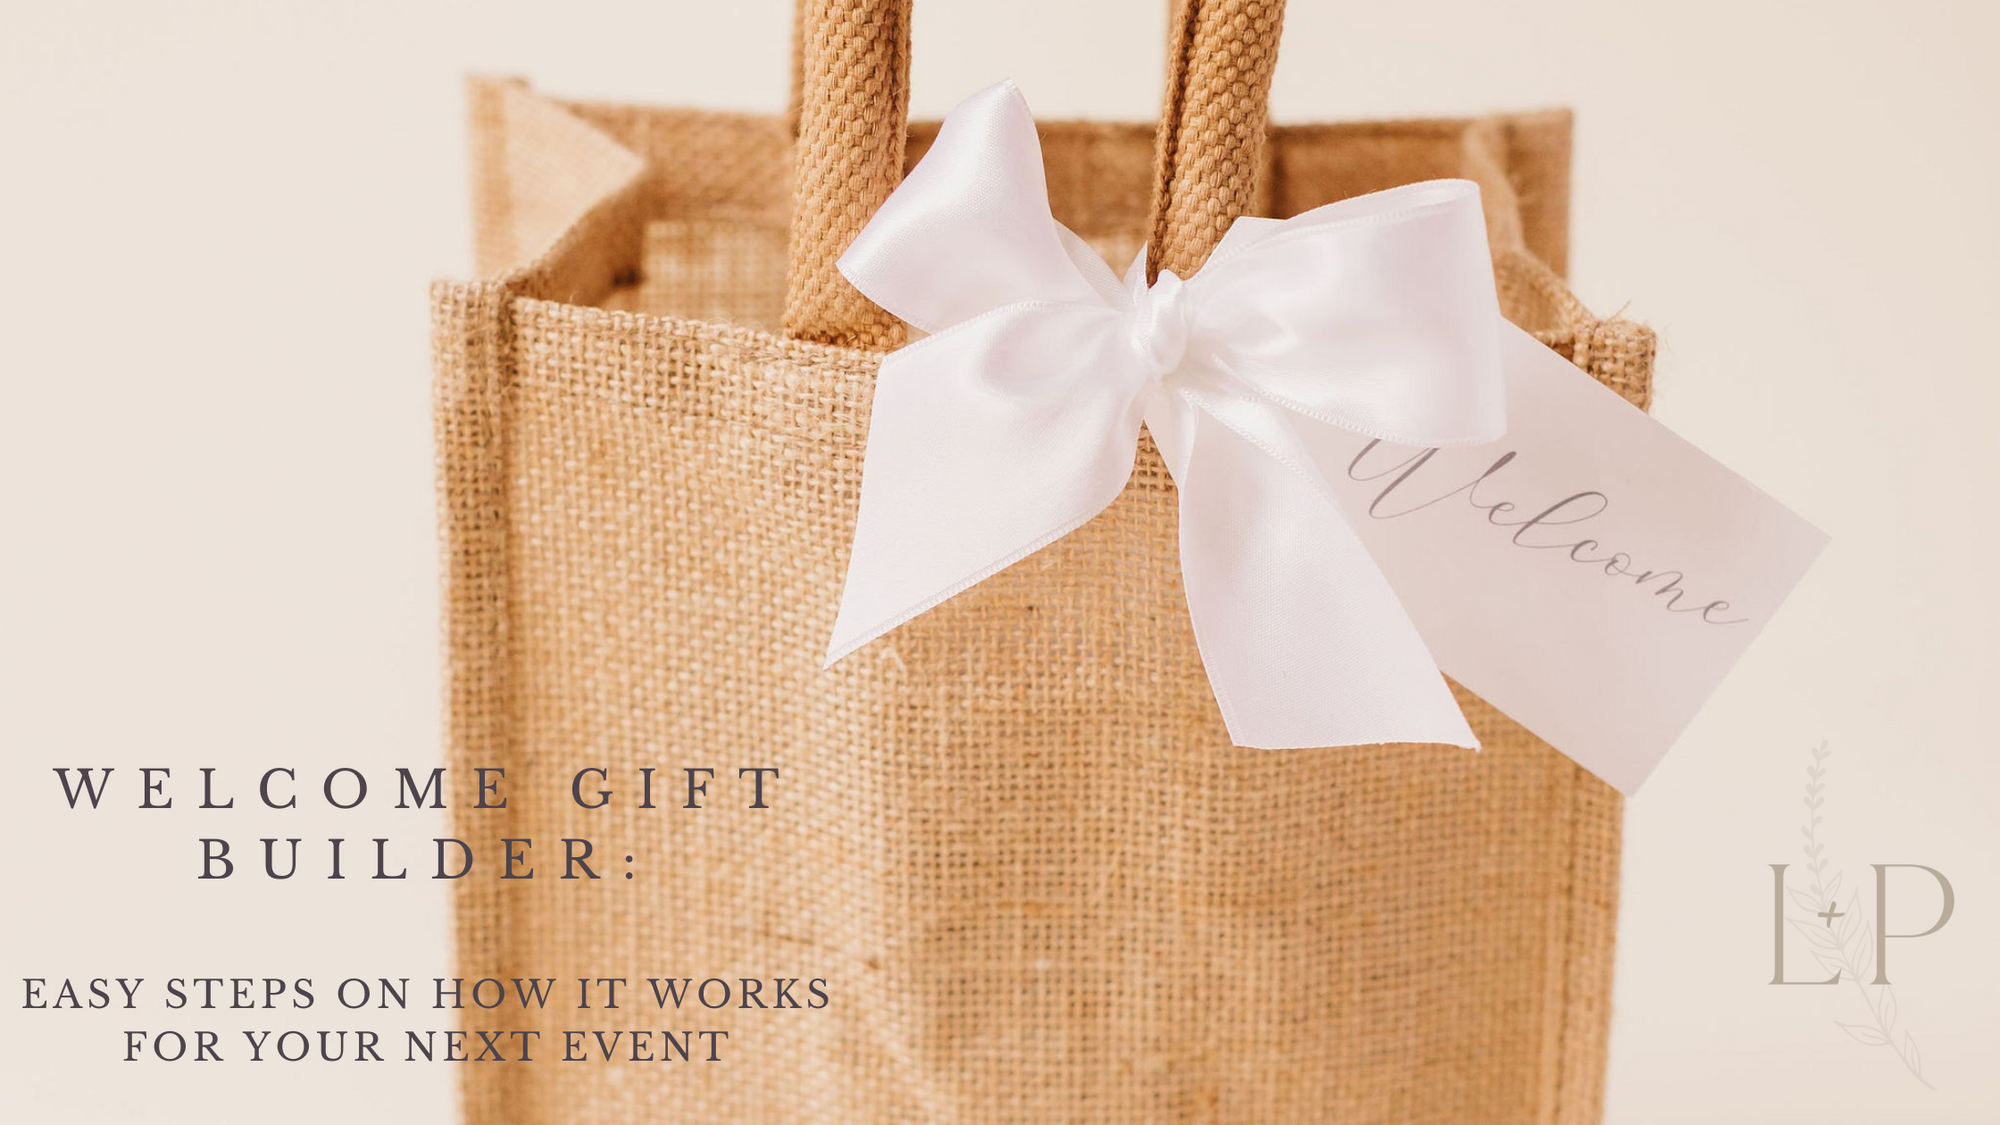 DIY Gift Bags for Hotel Guests: Design + Order in 10 minutes!